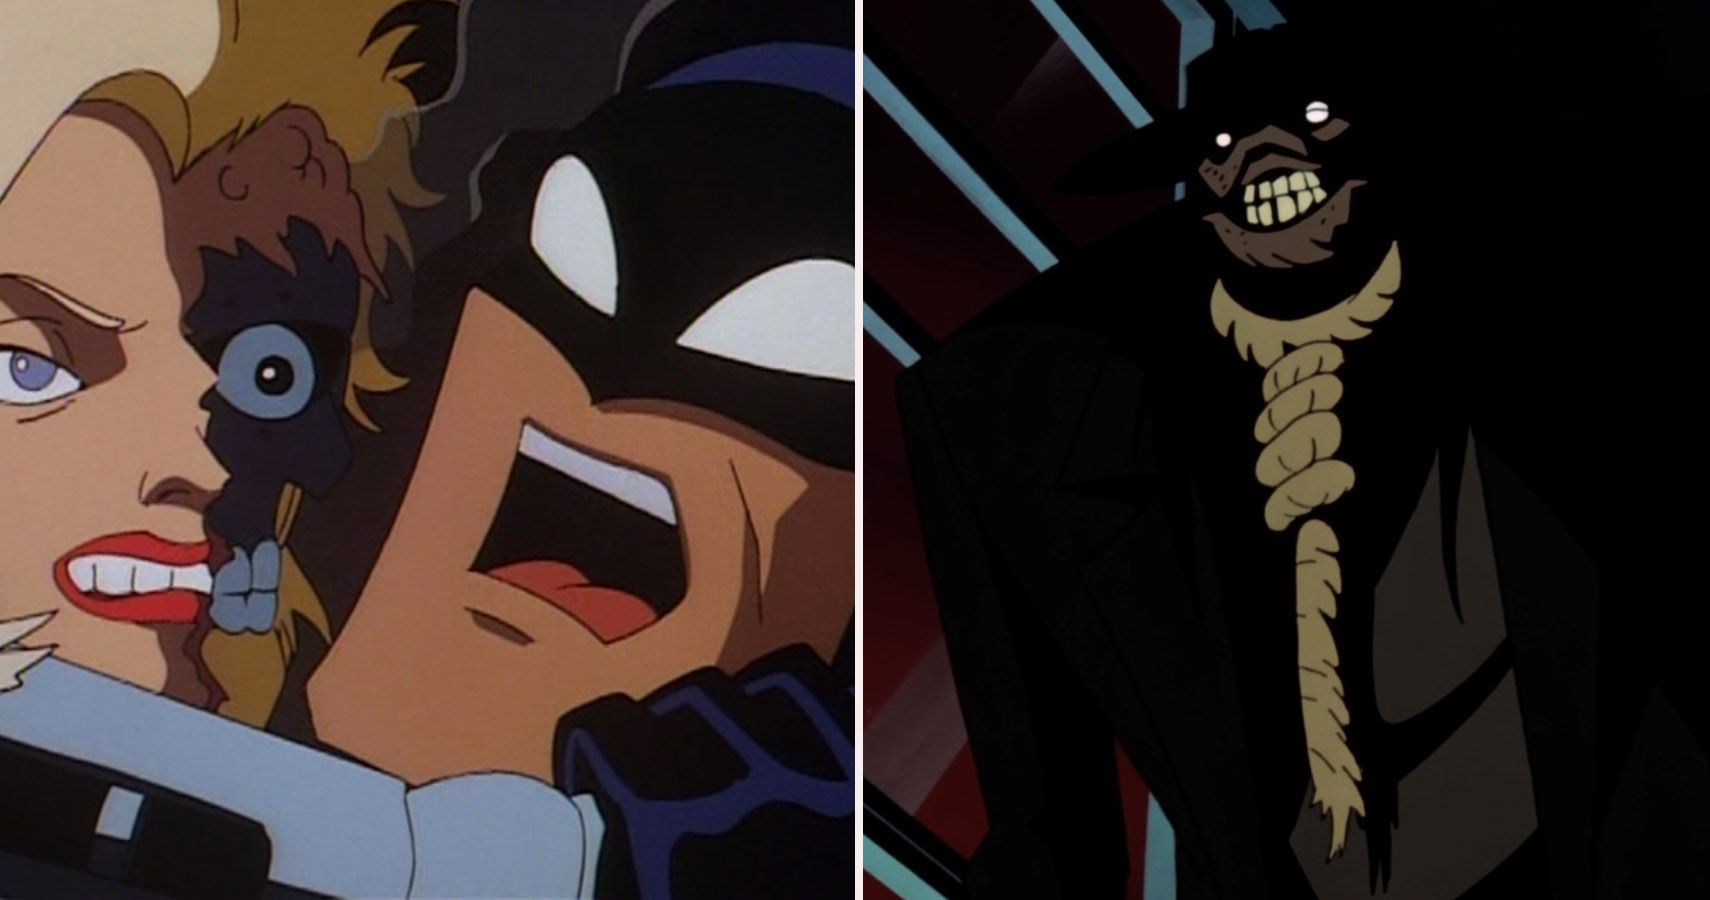 10 Creepiest Episodes Of Batman: The Animated Series